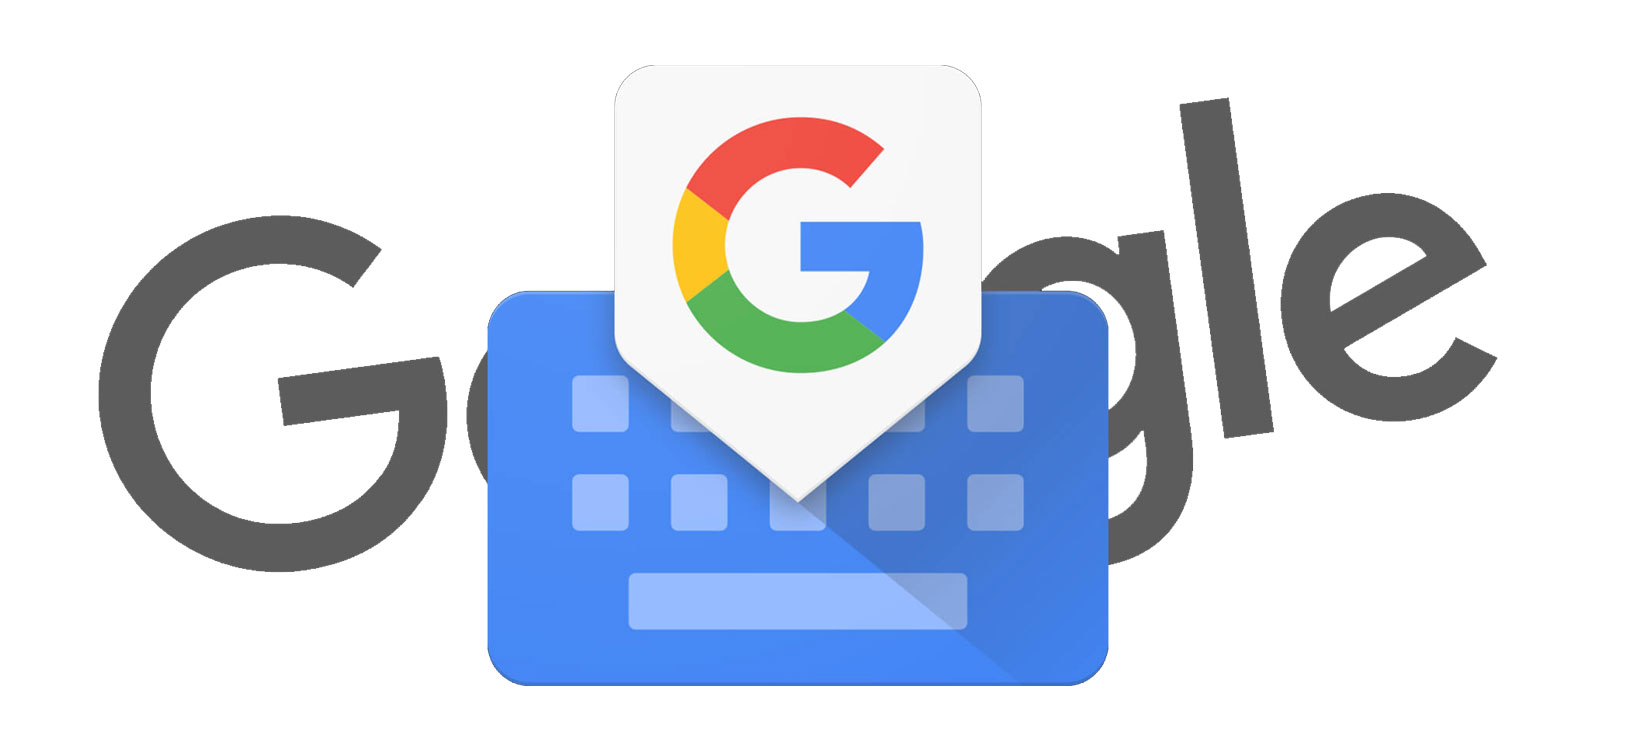 Google’s Gboard keyboard now lets you communicate through Morse code on both Android and iOS